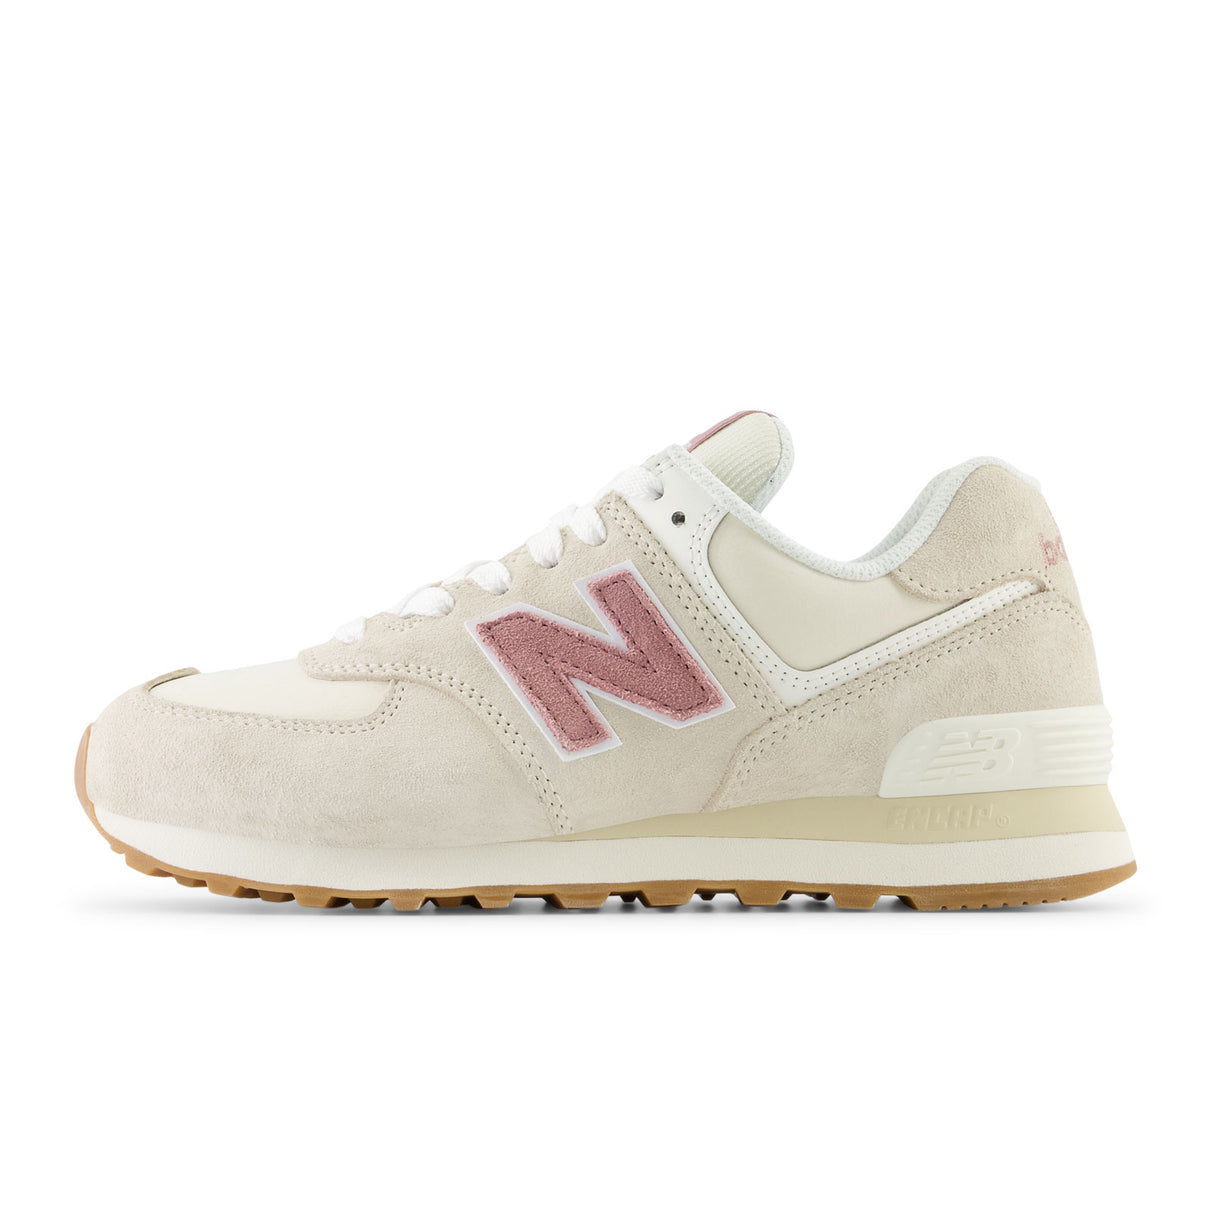 New Balance 574 Sneaker (Women) - Linen/Rosewood Athletic - Casual - Lace Up - The Heel Shoe Fitters